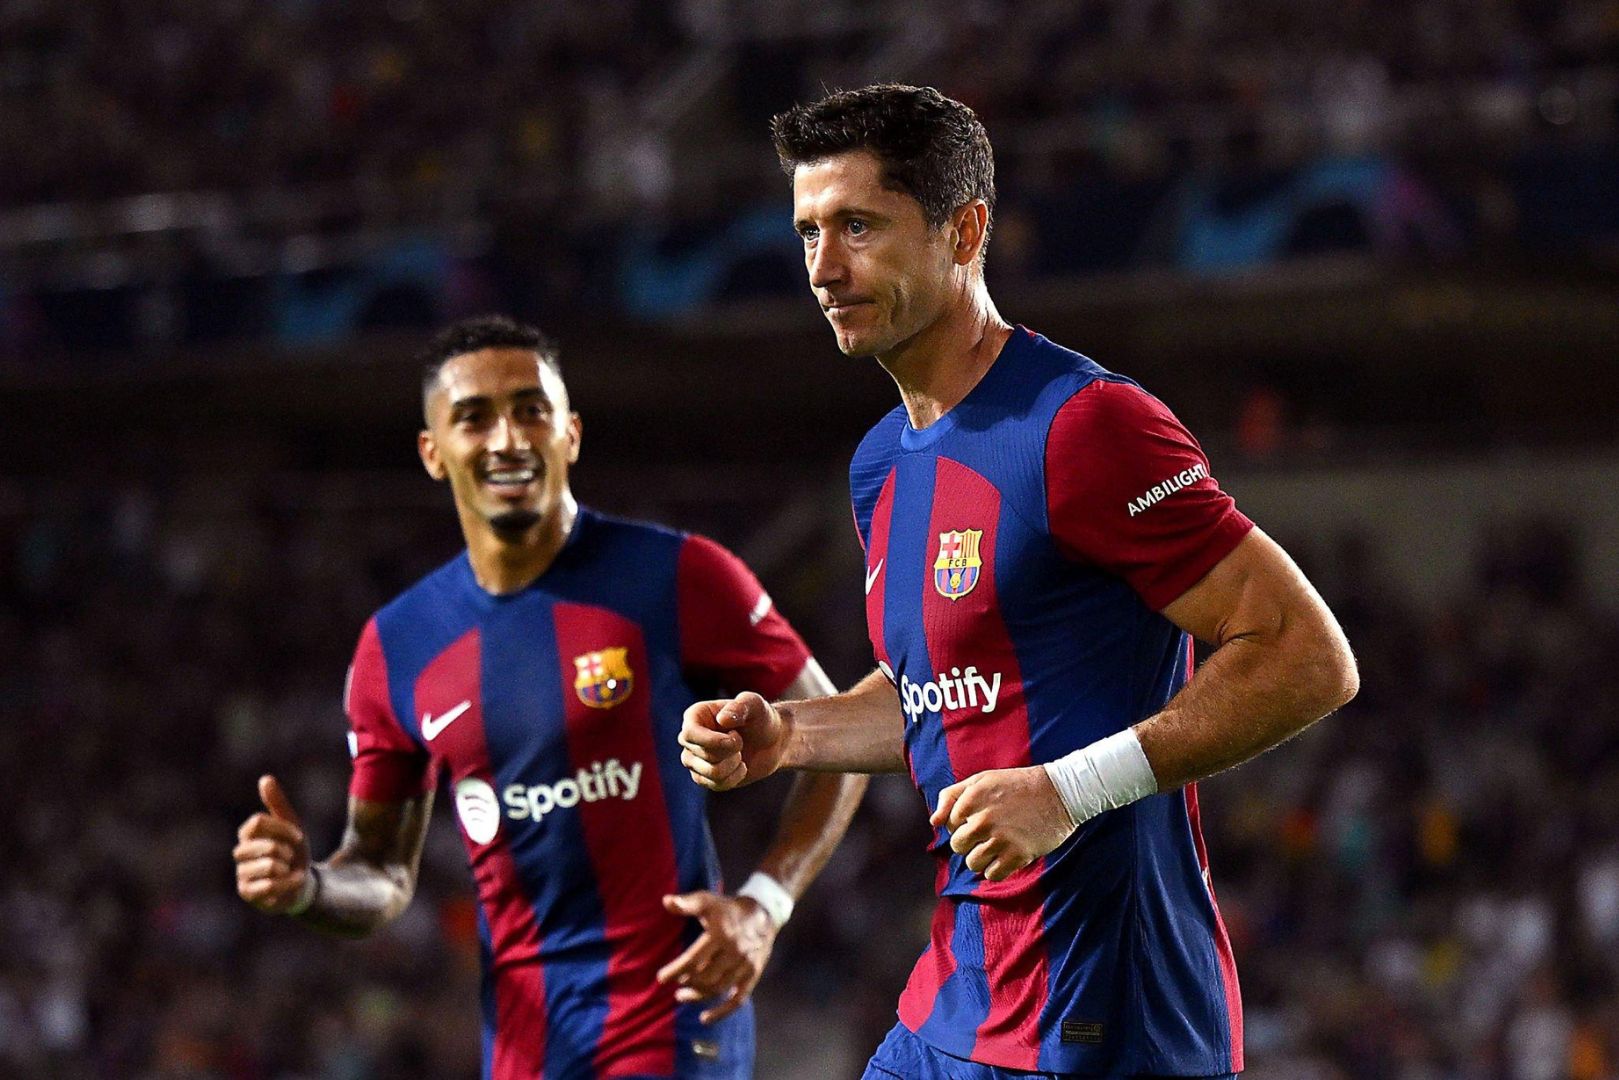 BARCELONA, SPAIN - SEPTEMBER 19: Robert Lewandowski of Barcelona celebrates after scoring the team's second goal during the UEFA Champions League Group H match between FC Barcelona and Royal Antwerp at Estadi Olimpic Lluis Companys on September 19, 2023 in Barcelona, Spain.